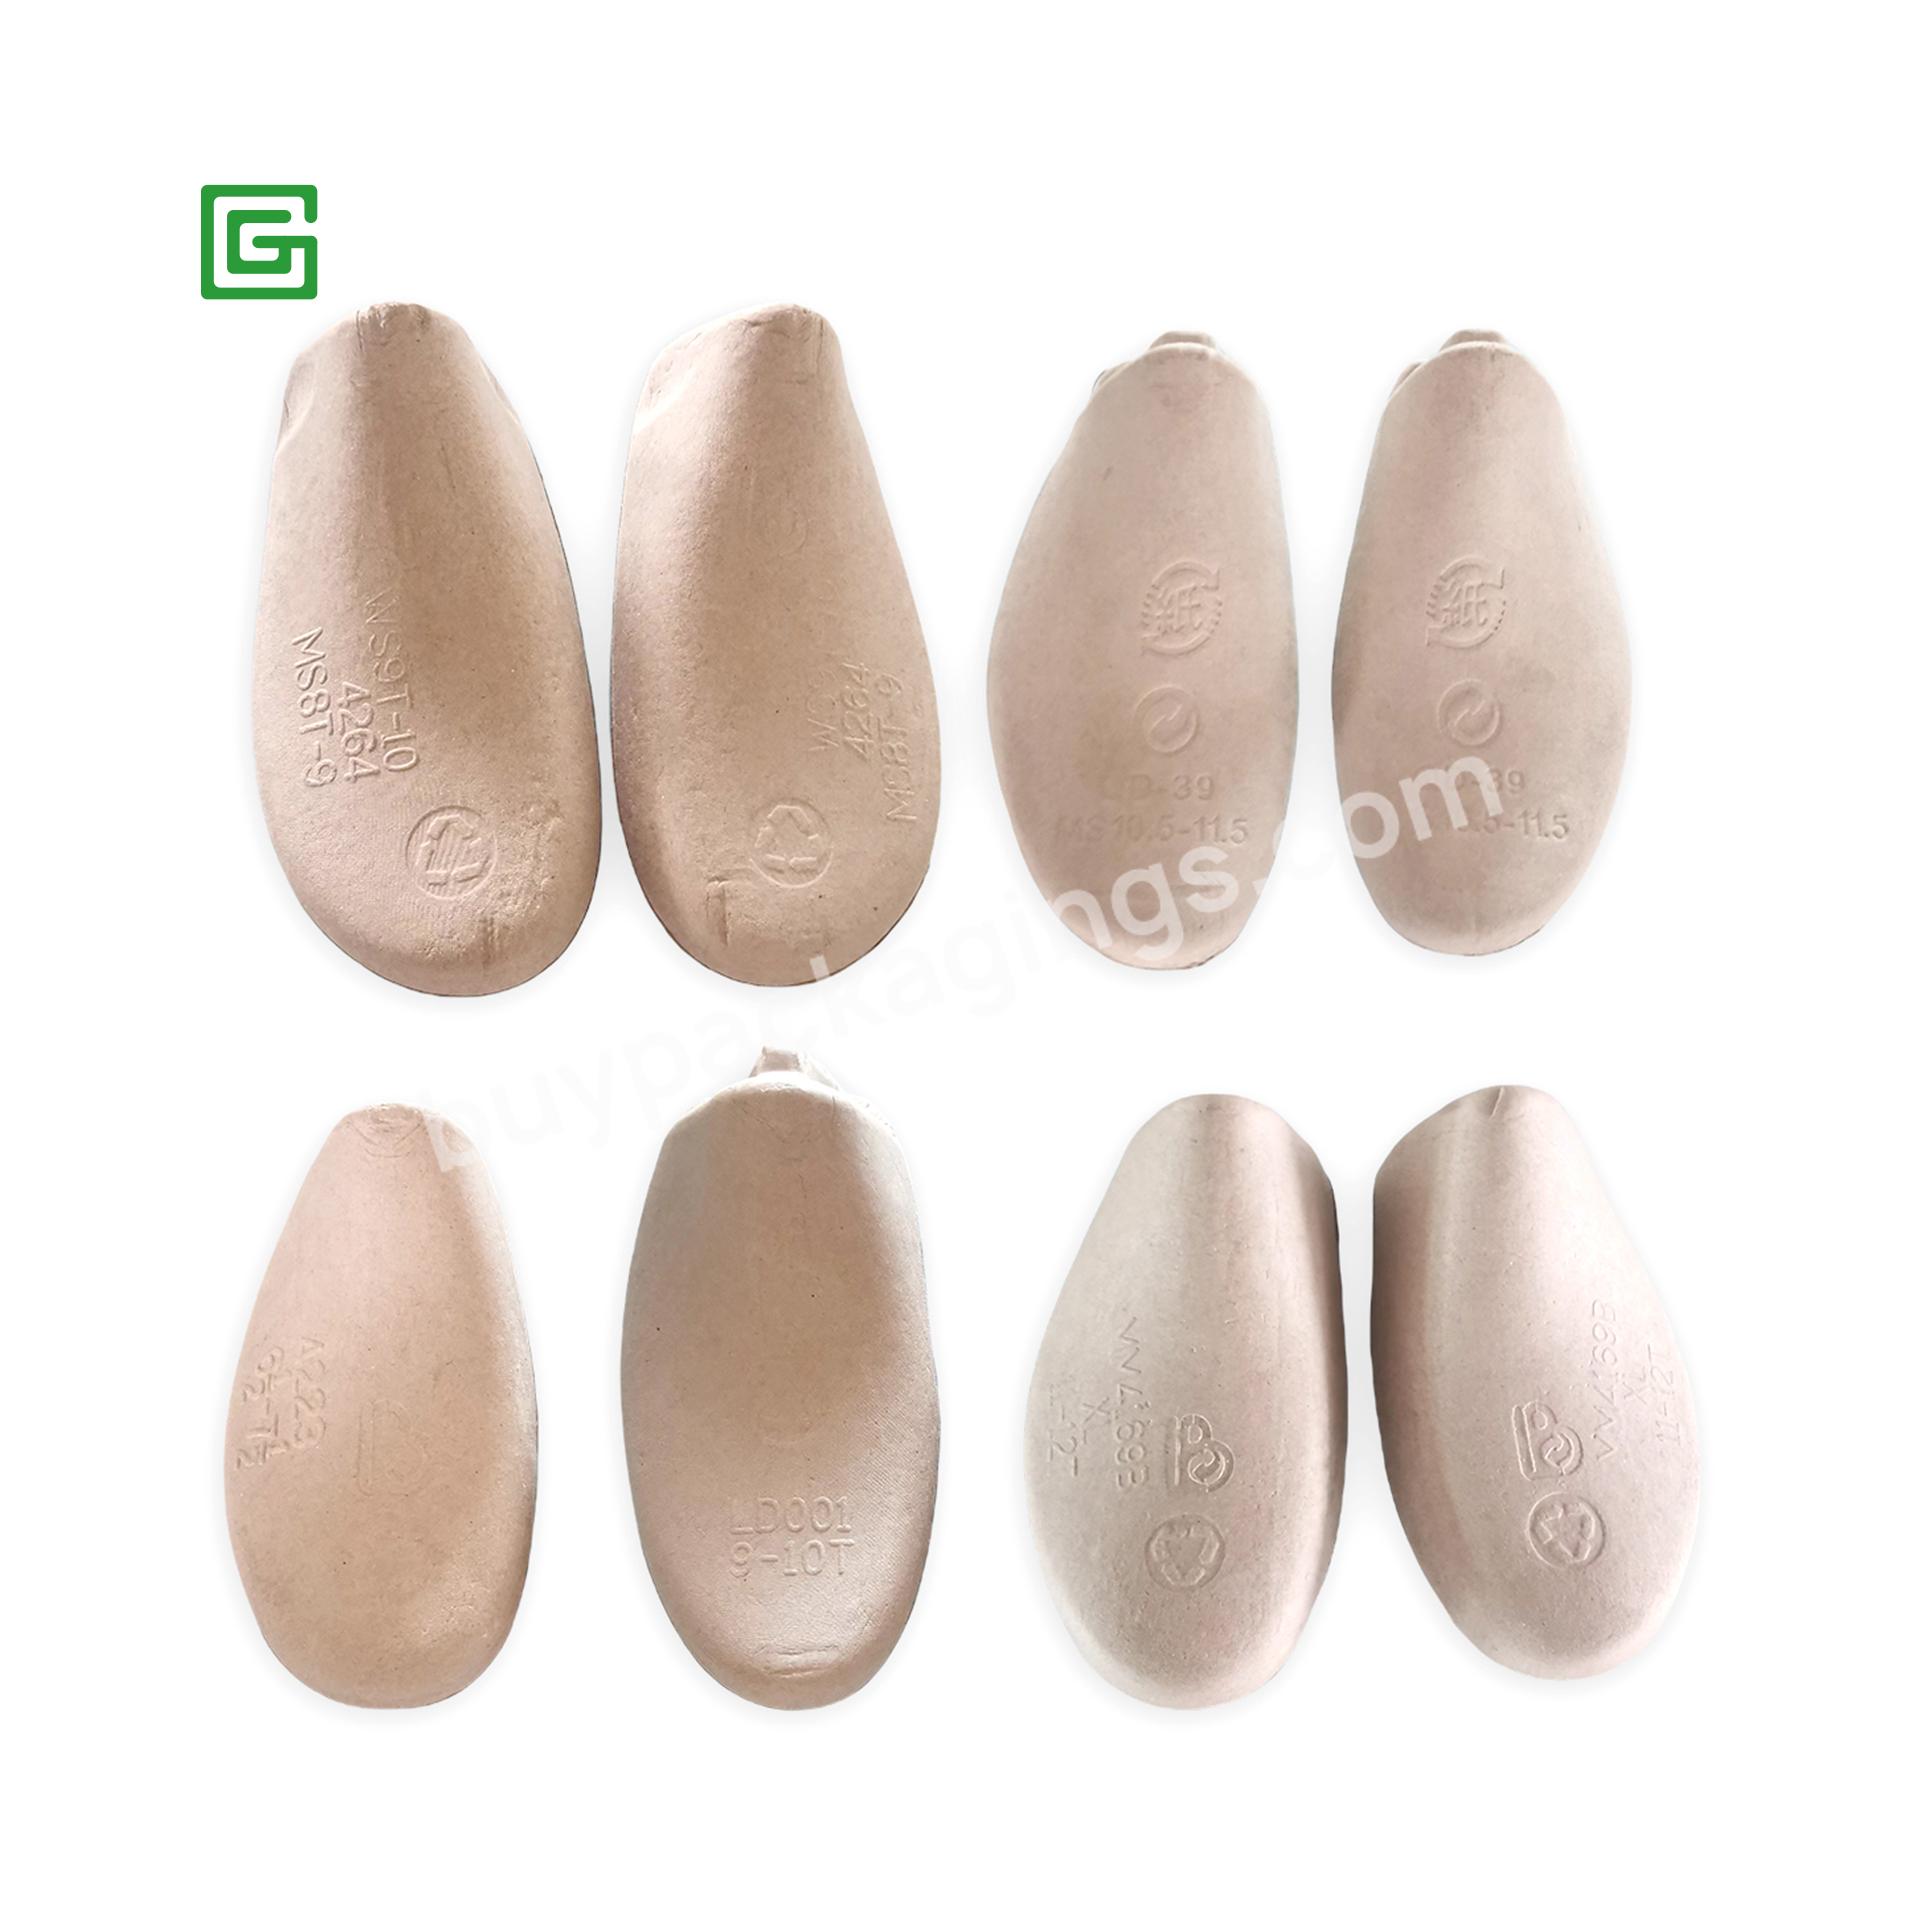 Custom Recycled Colors Dry Press Shoe Trees Paper Pulp Shoe Stretchers - Buy Paper Pulp Shoe Tree,Custom Colors Shoe Trees,Dry Press Shoe Stretcher.